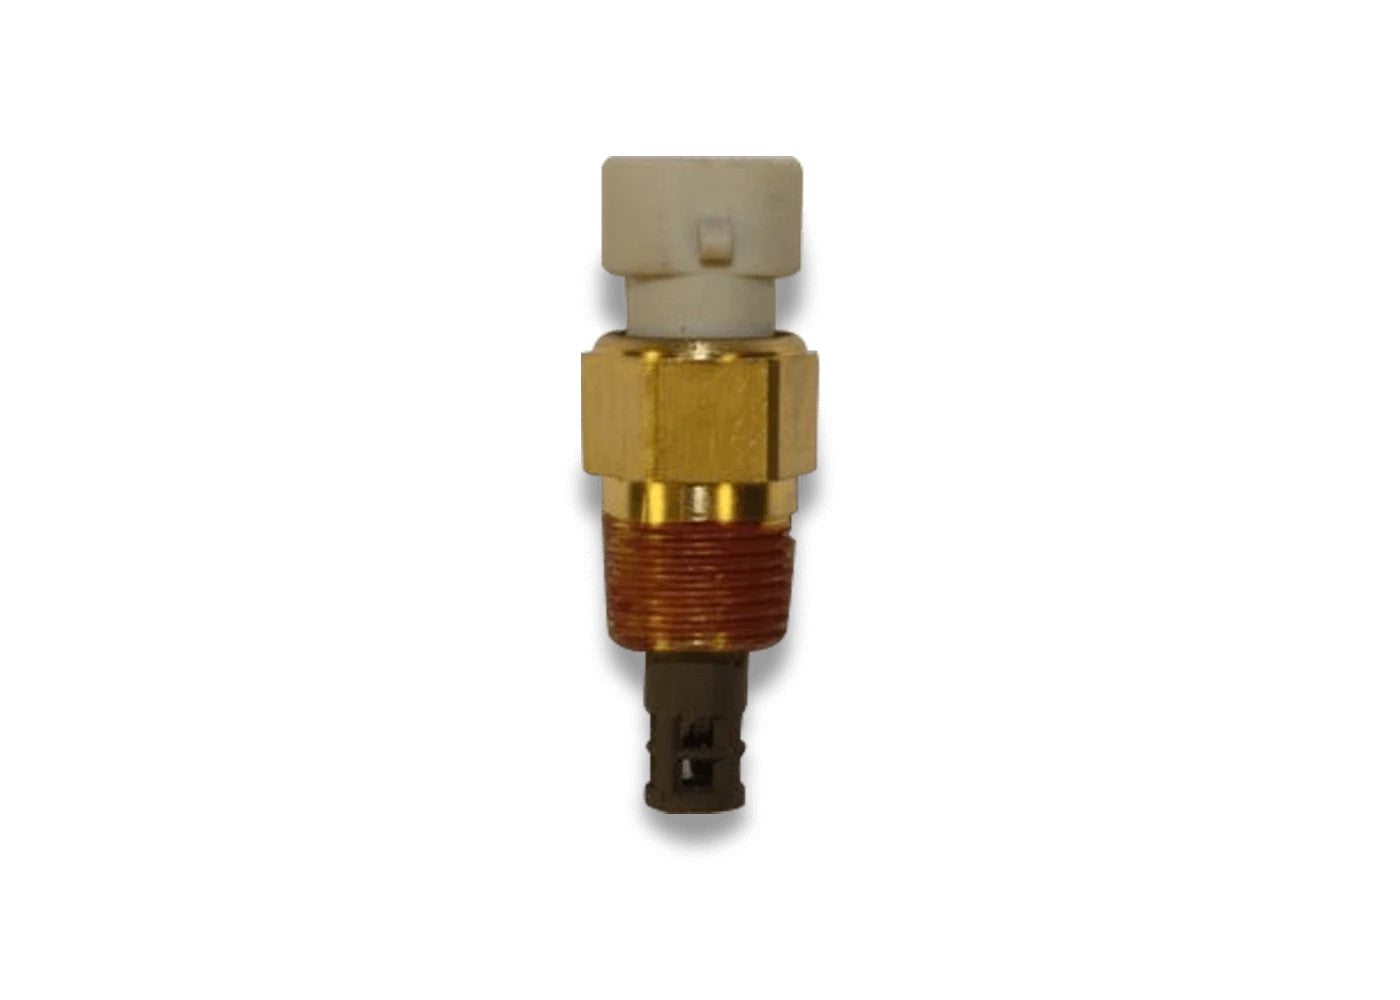 FuelTech Intake Air Temperature Sensor IAT 3/8" NPT Without Mating Plug for all FuelTech ECUs